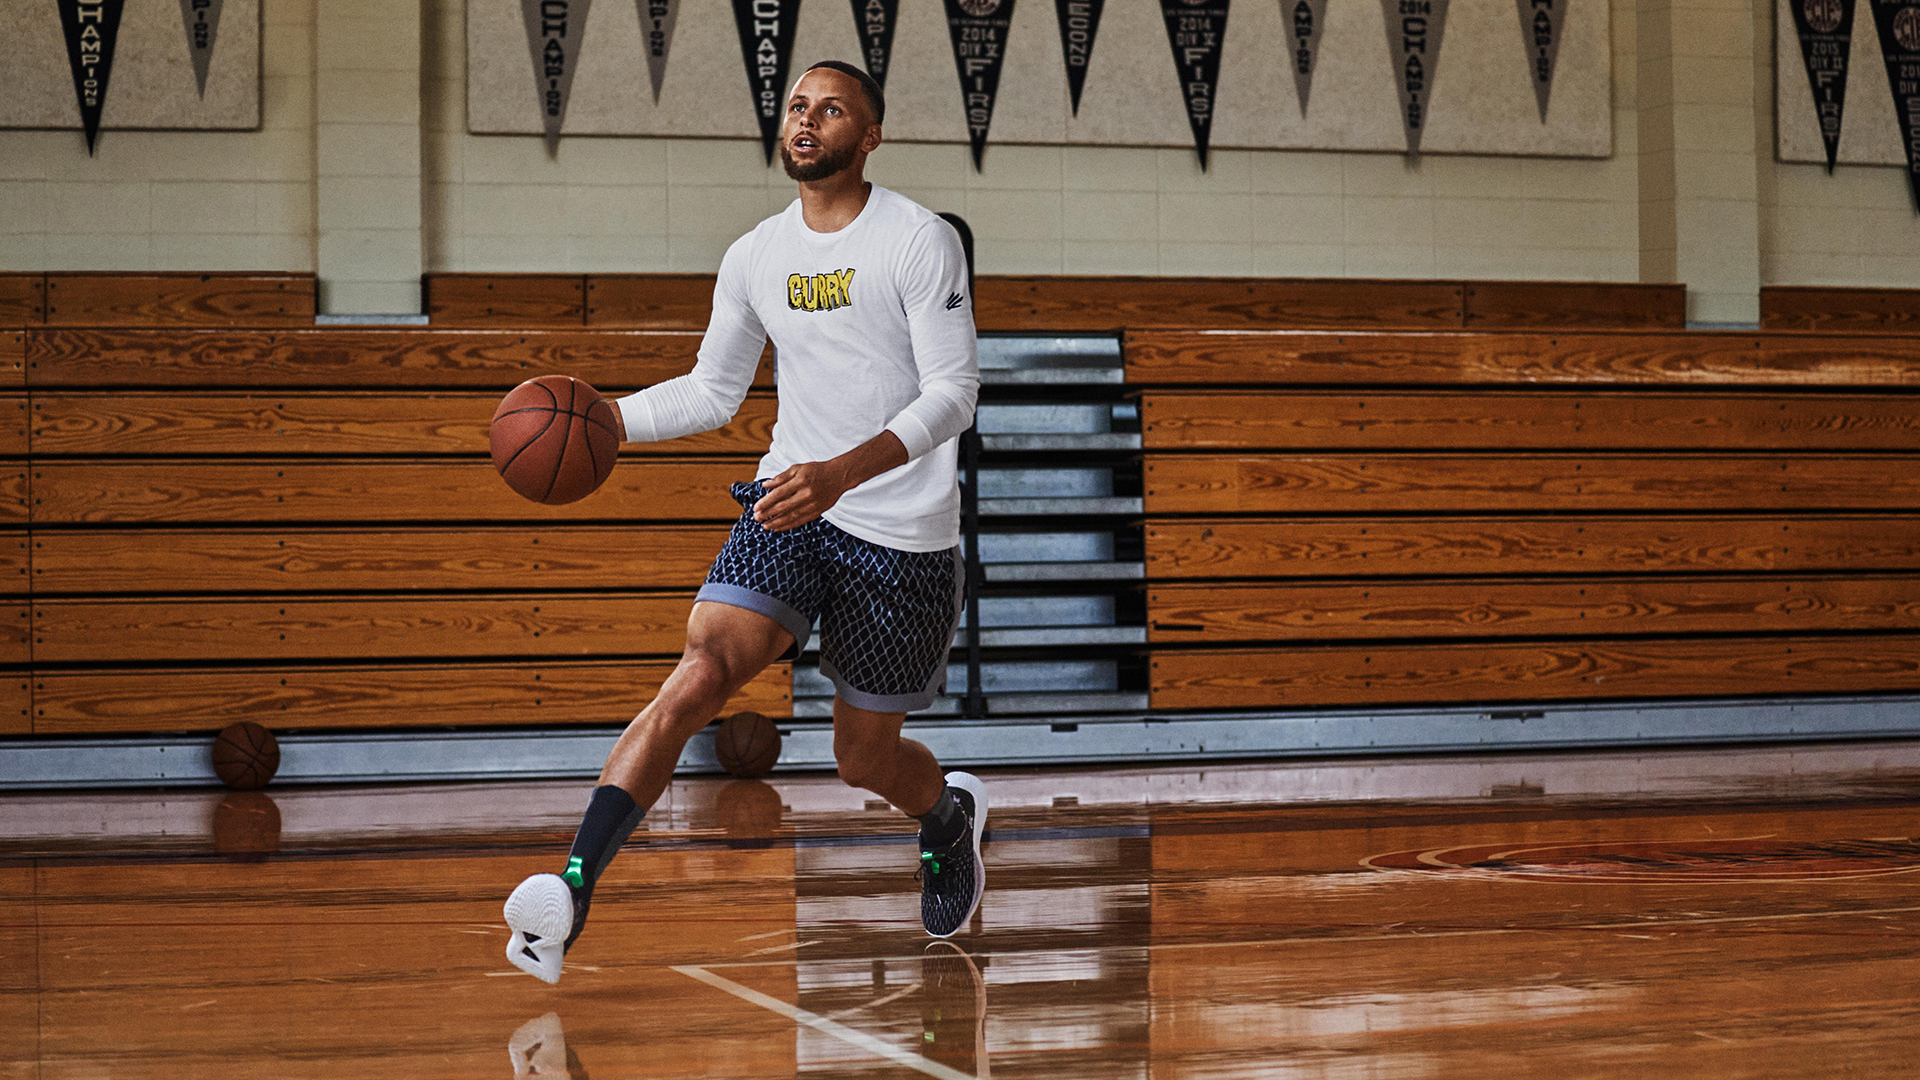 StockX NBA Steph Curry in UA shoes playing ball